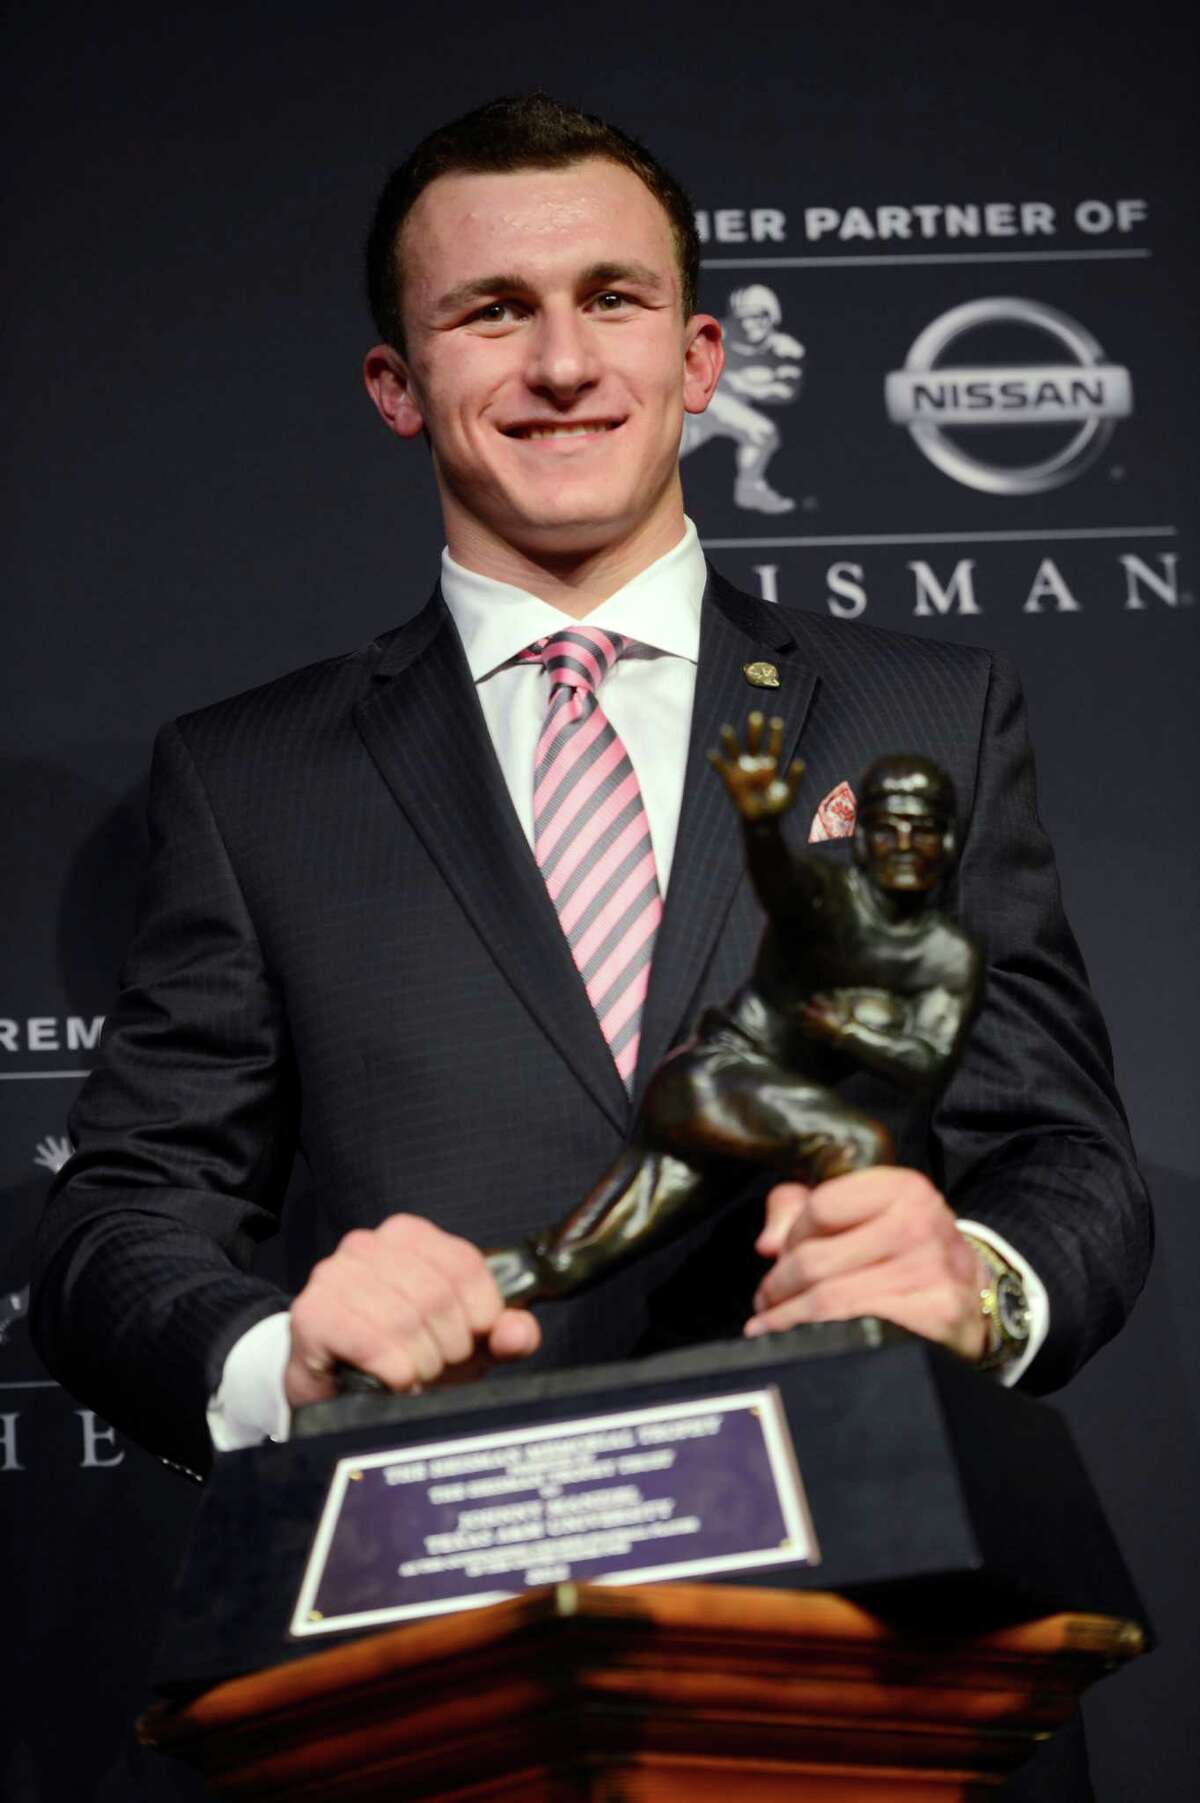 FILE - In this Dec. 8, 2012 file photo, then-Texas A&M quarterback Johnny Manziel poses with the Heisman Trophy after becoming the first freshman to win the college football award, in New York. Manziel was indicted by a grand jury on Tuesday, April 26, 2016, on misdemeanor charges stemming from a domestic violence complaint by his ex-girlfriend.(AP Photo/Henny Ray Abrams, File)